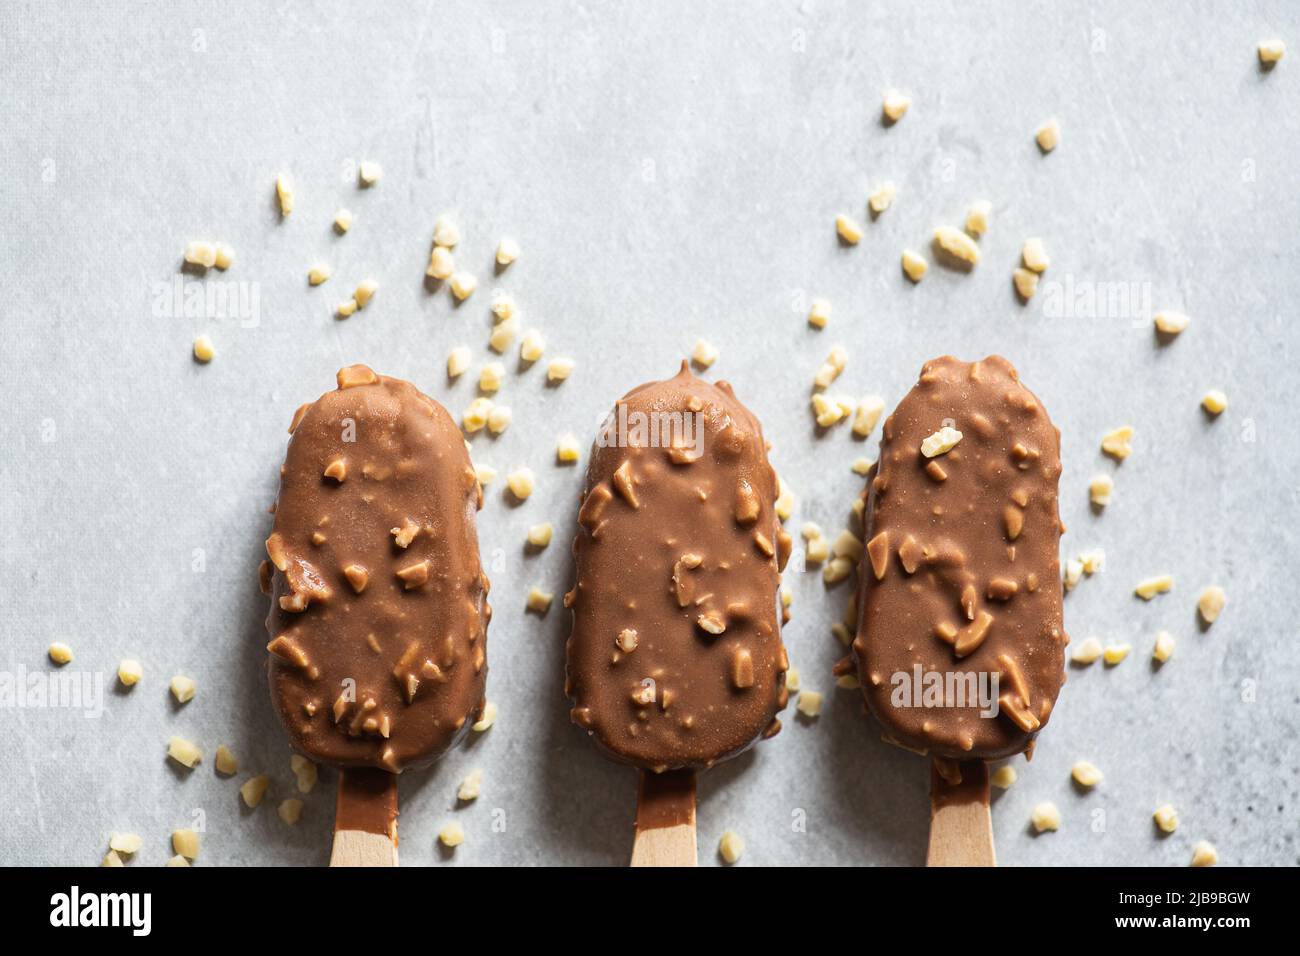 Three chocolate almond ice-cream on a wooden stick. Top view. Stock Photo